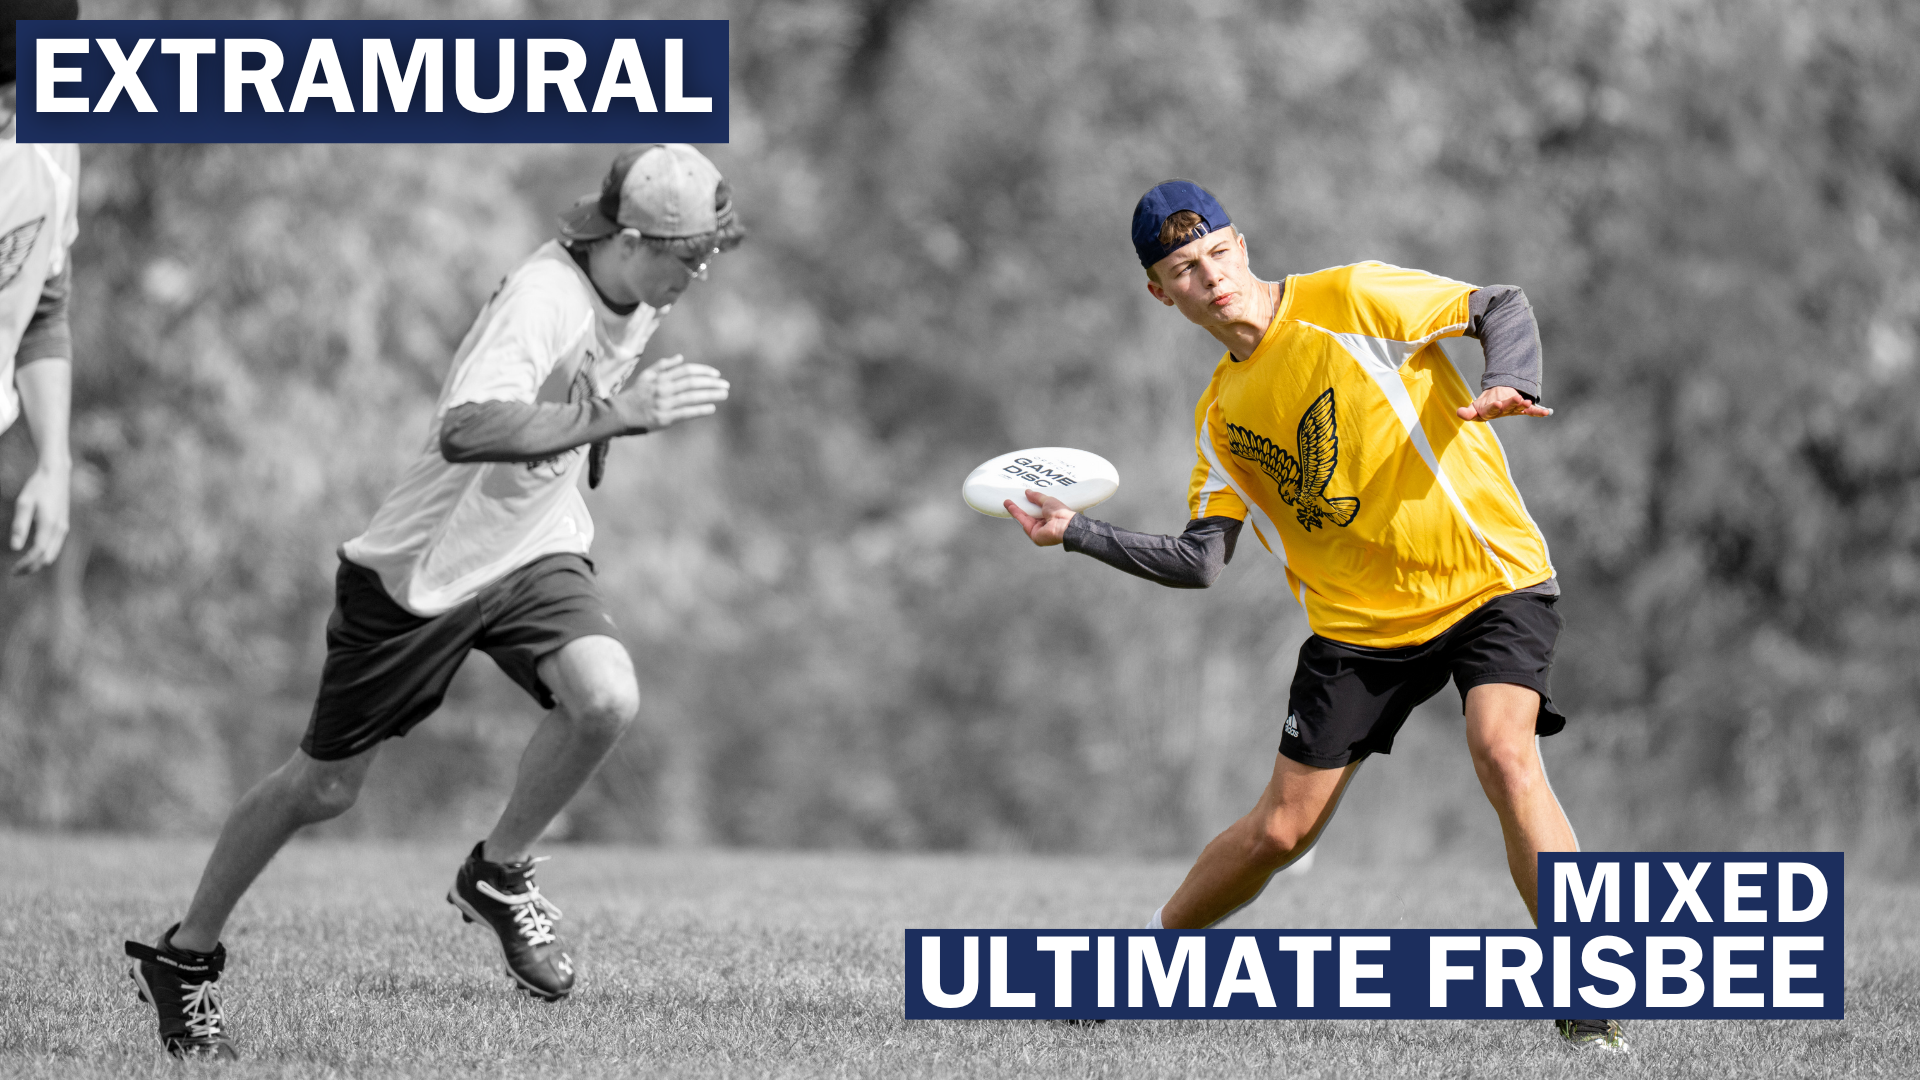 Extramural Mixed Ultimate Frisbee